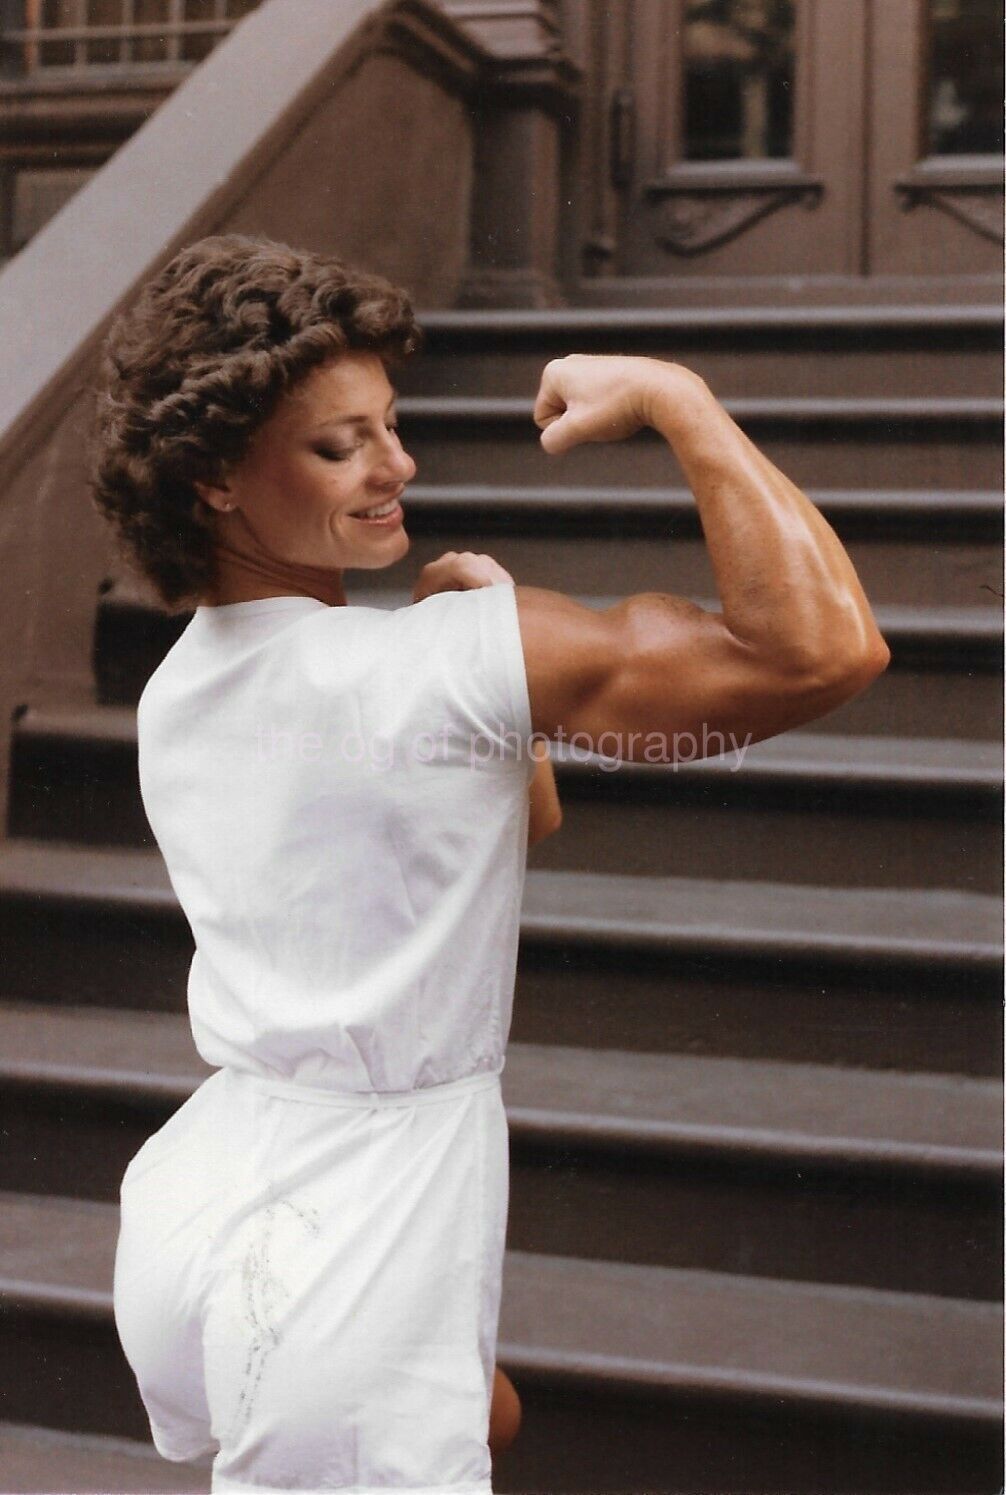 FEMALE BODYBUILDER 80's 90's FOUND Photo Poster painting Color MUSCLE GIRL Original EN 21 64 B